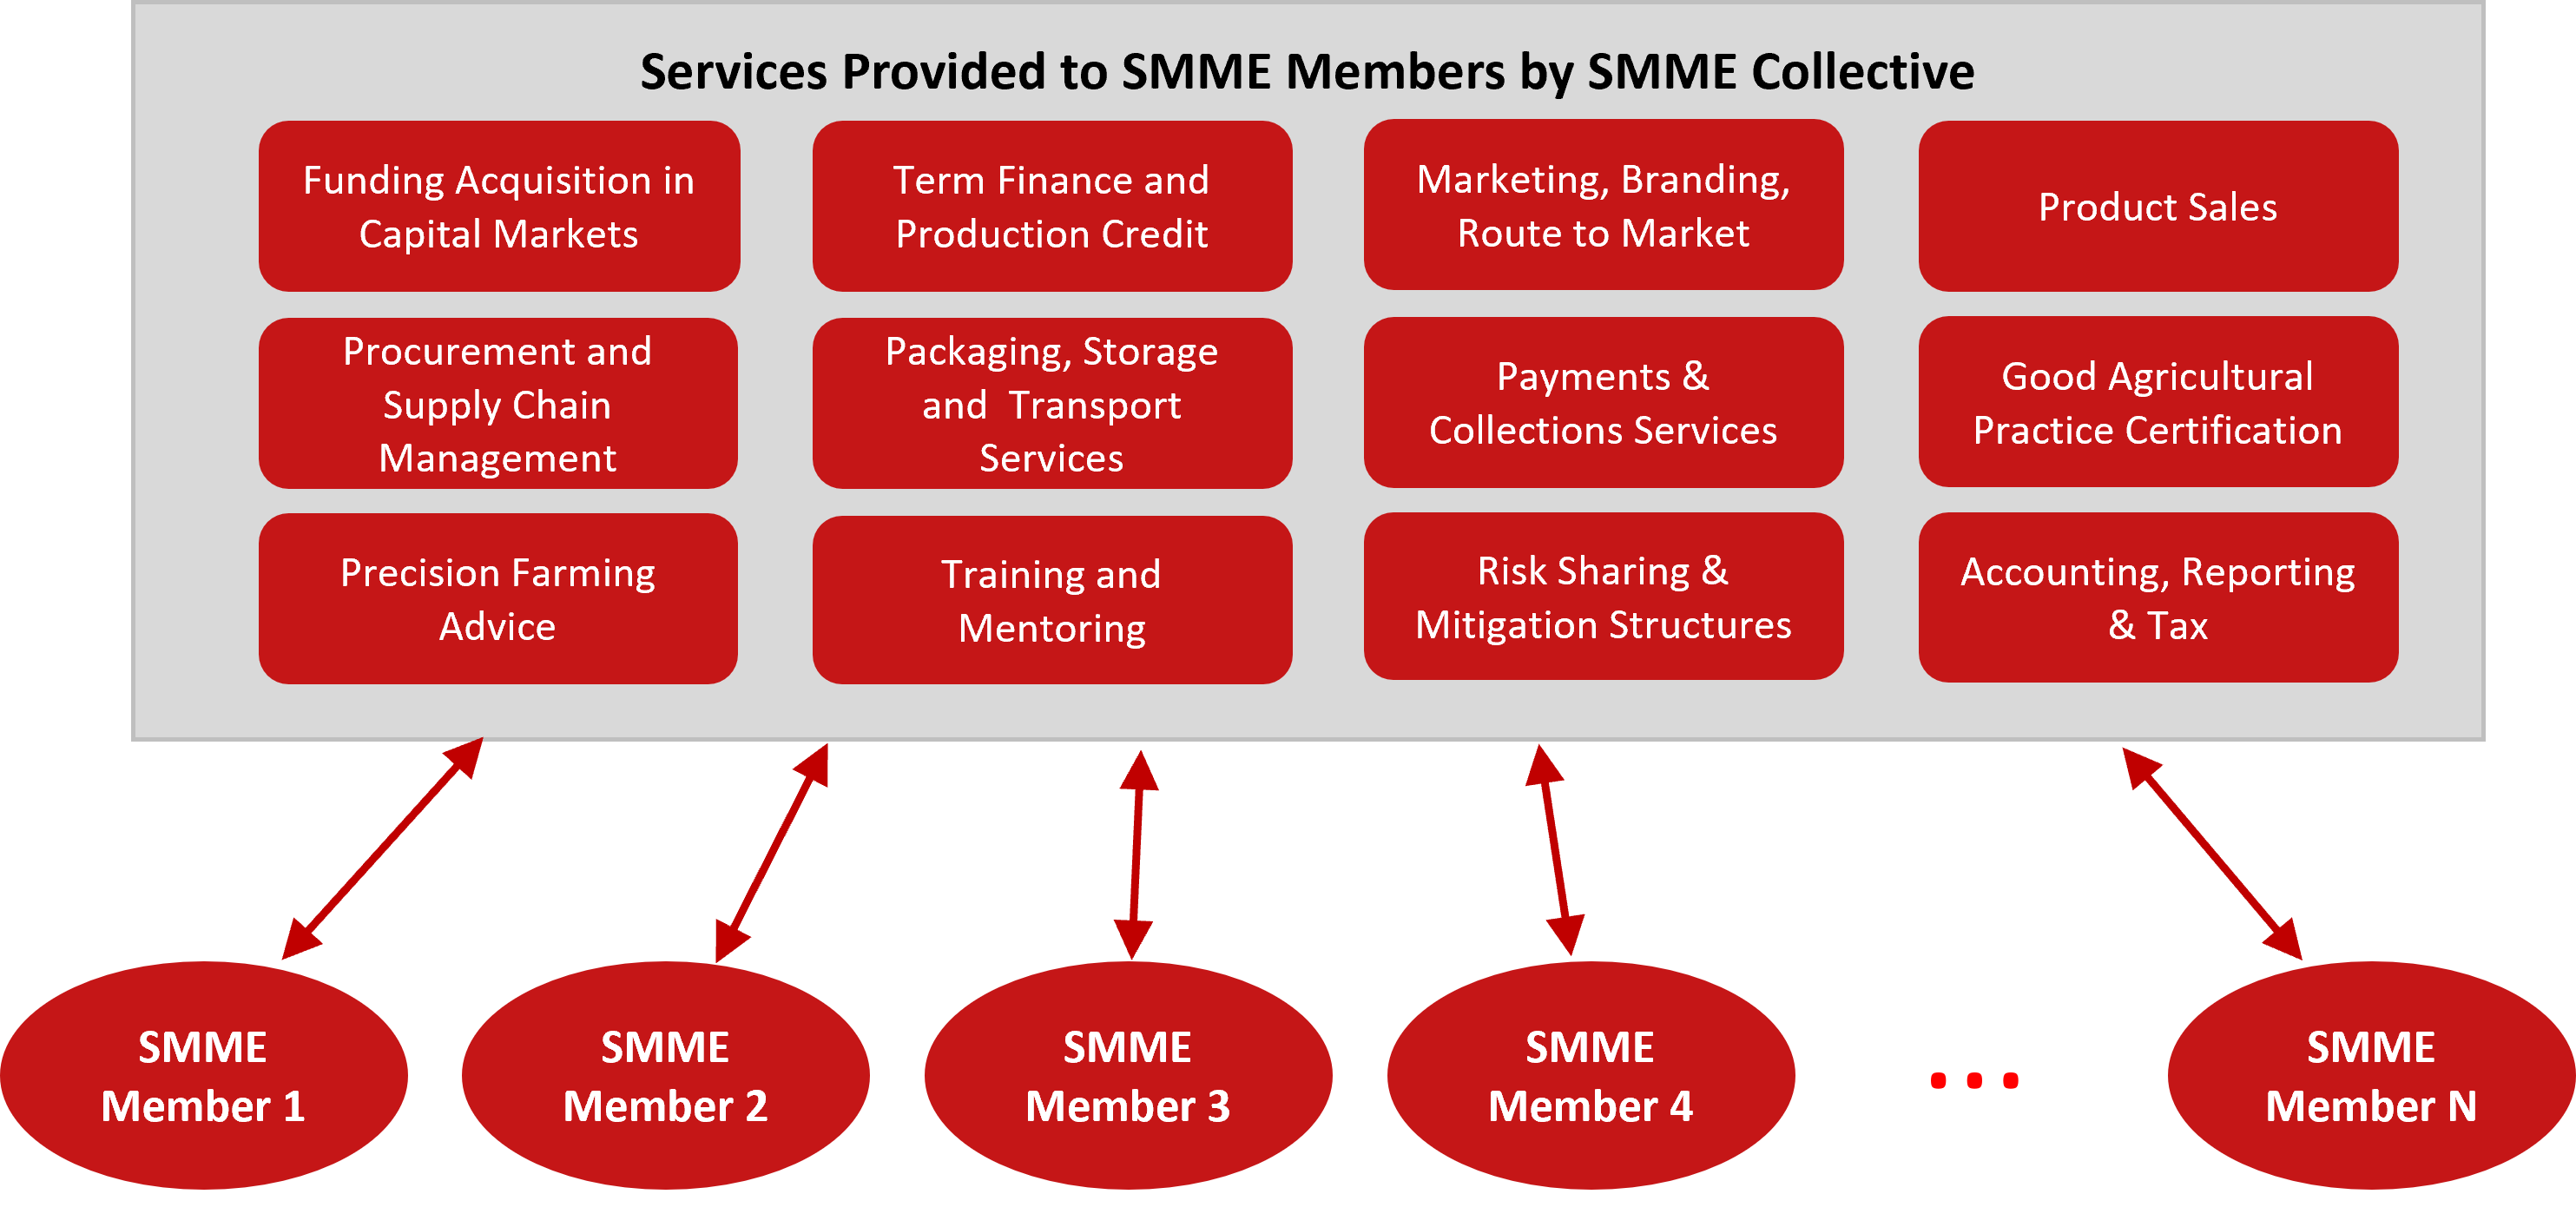 Services Provided to SMME Members by SMME Collective